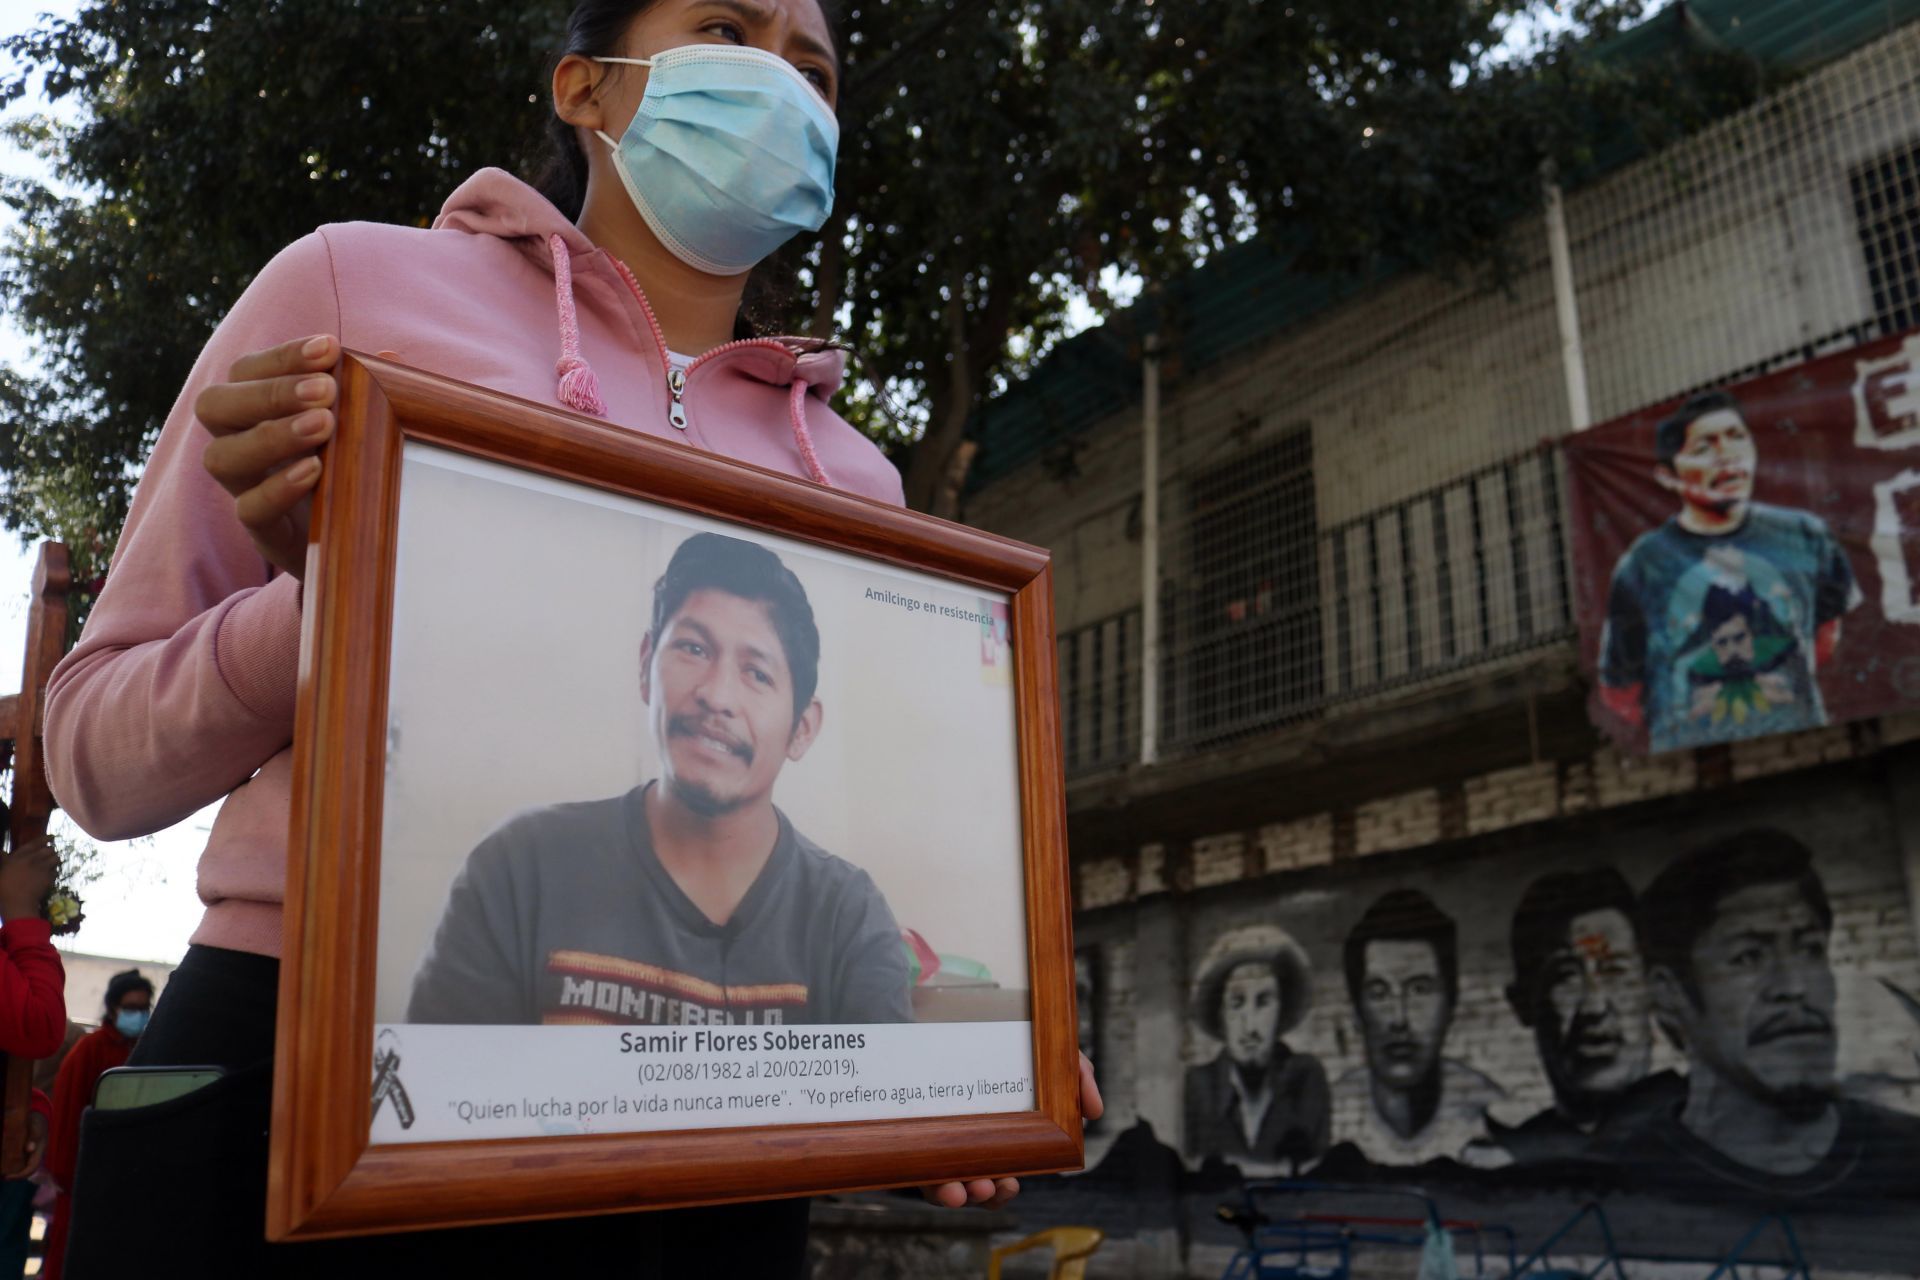 AMLO government adds up to 45 activists killed; "there are crises": DDT Network